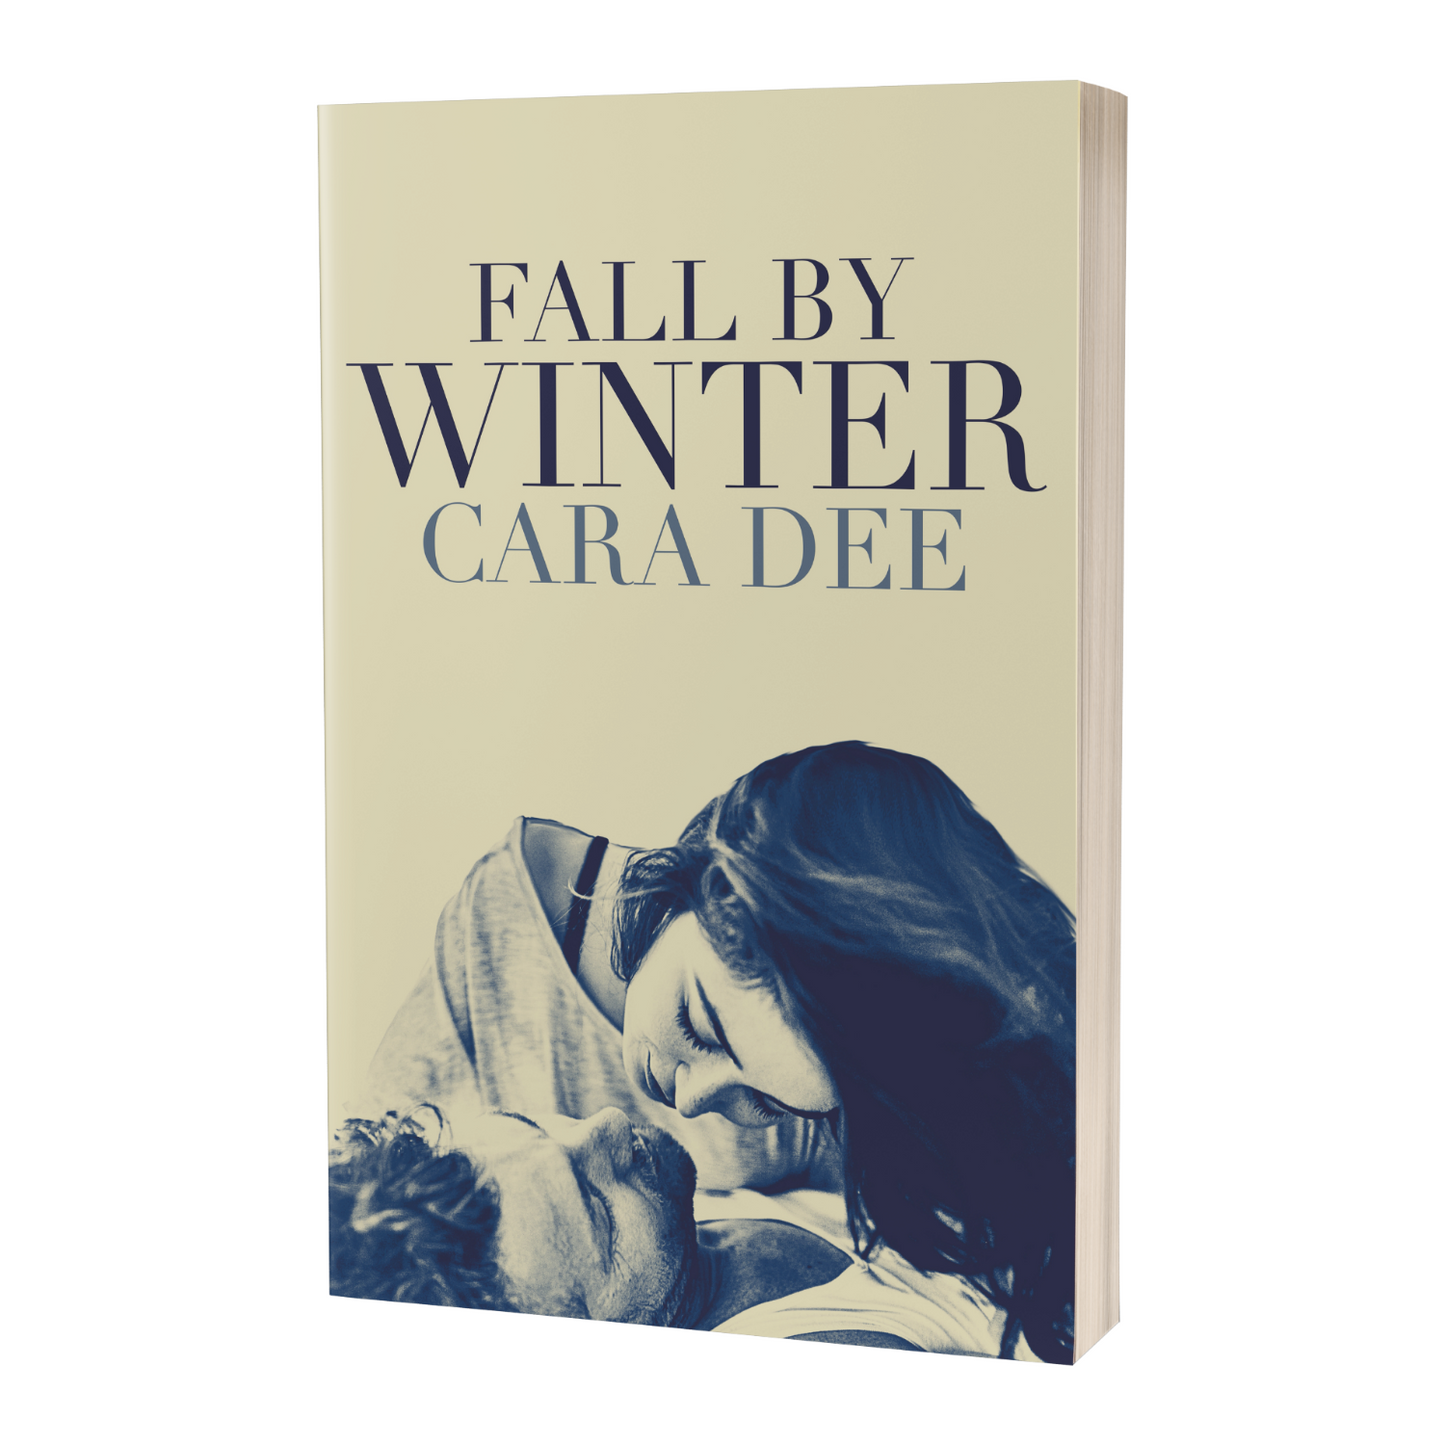 Fall by Winter